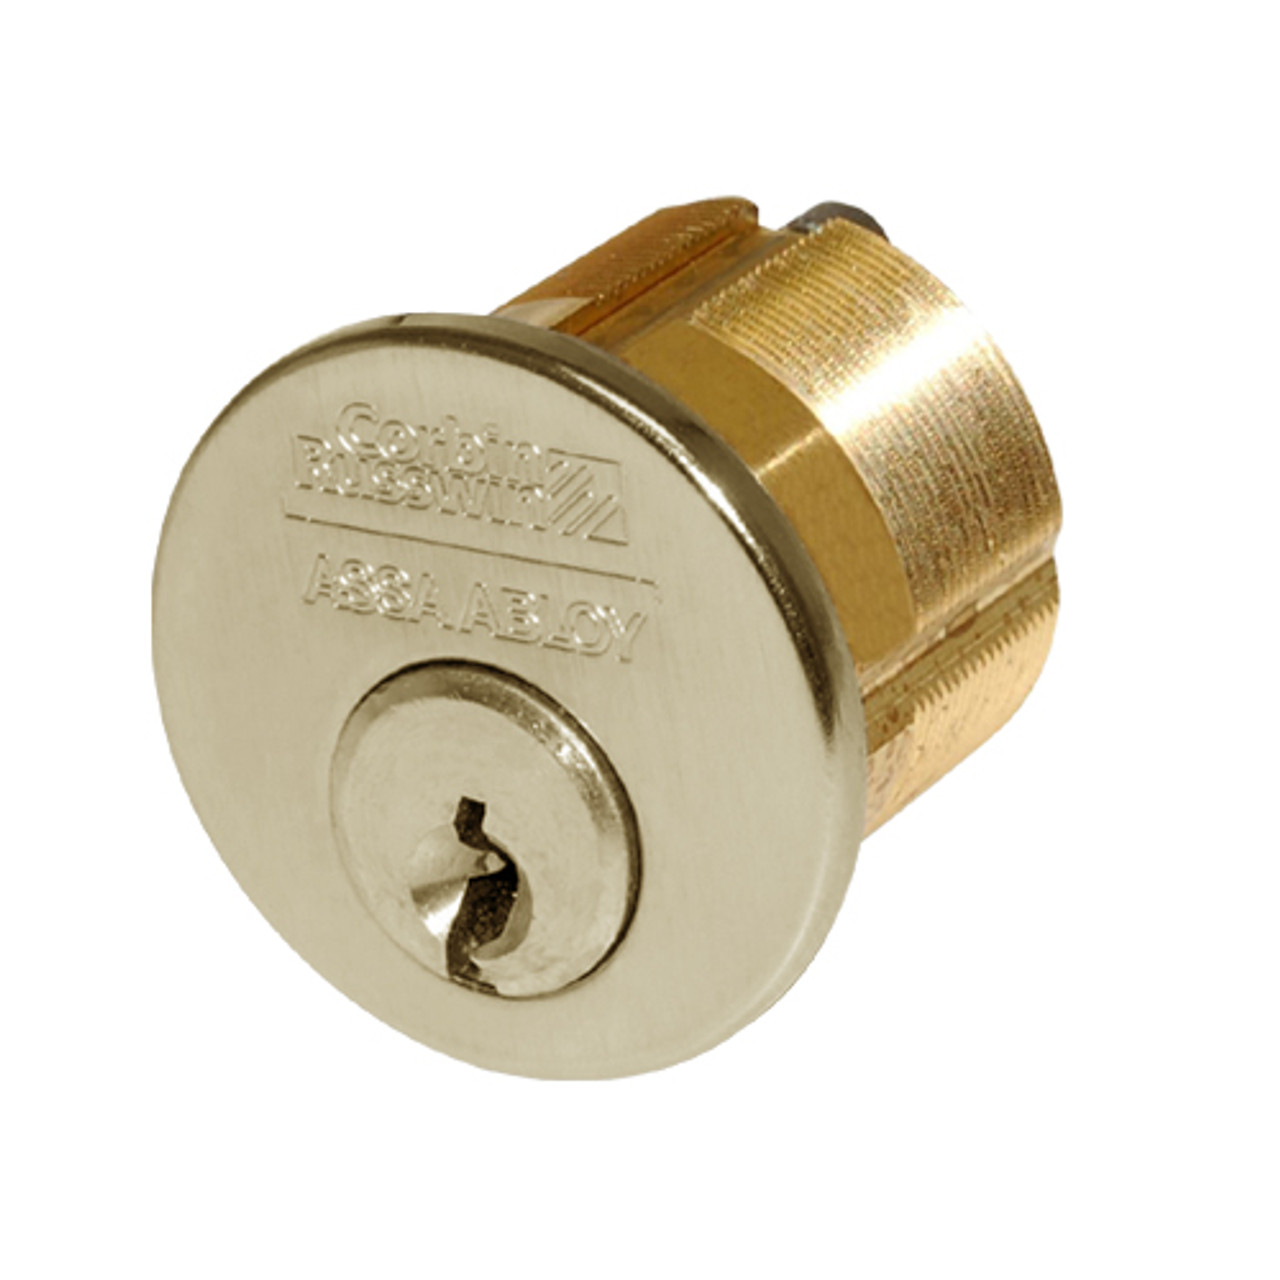 CR1000-200-A06-6-H6-606 Corbin Conventional Mortise Cylinder for Mortise Lock and DL3000 Deadlocks with Schlage L9000 Cam in Satin Brass Finish